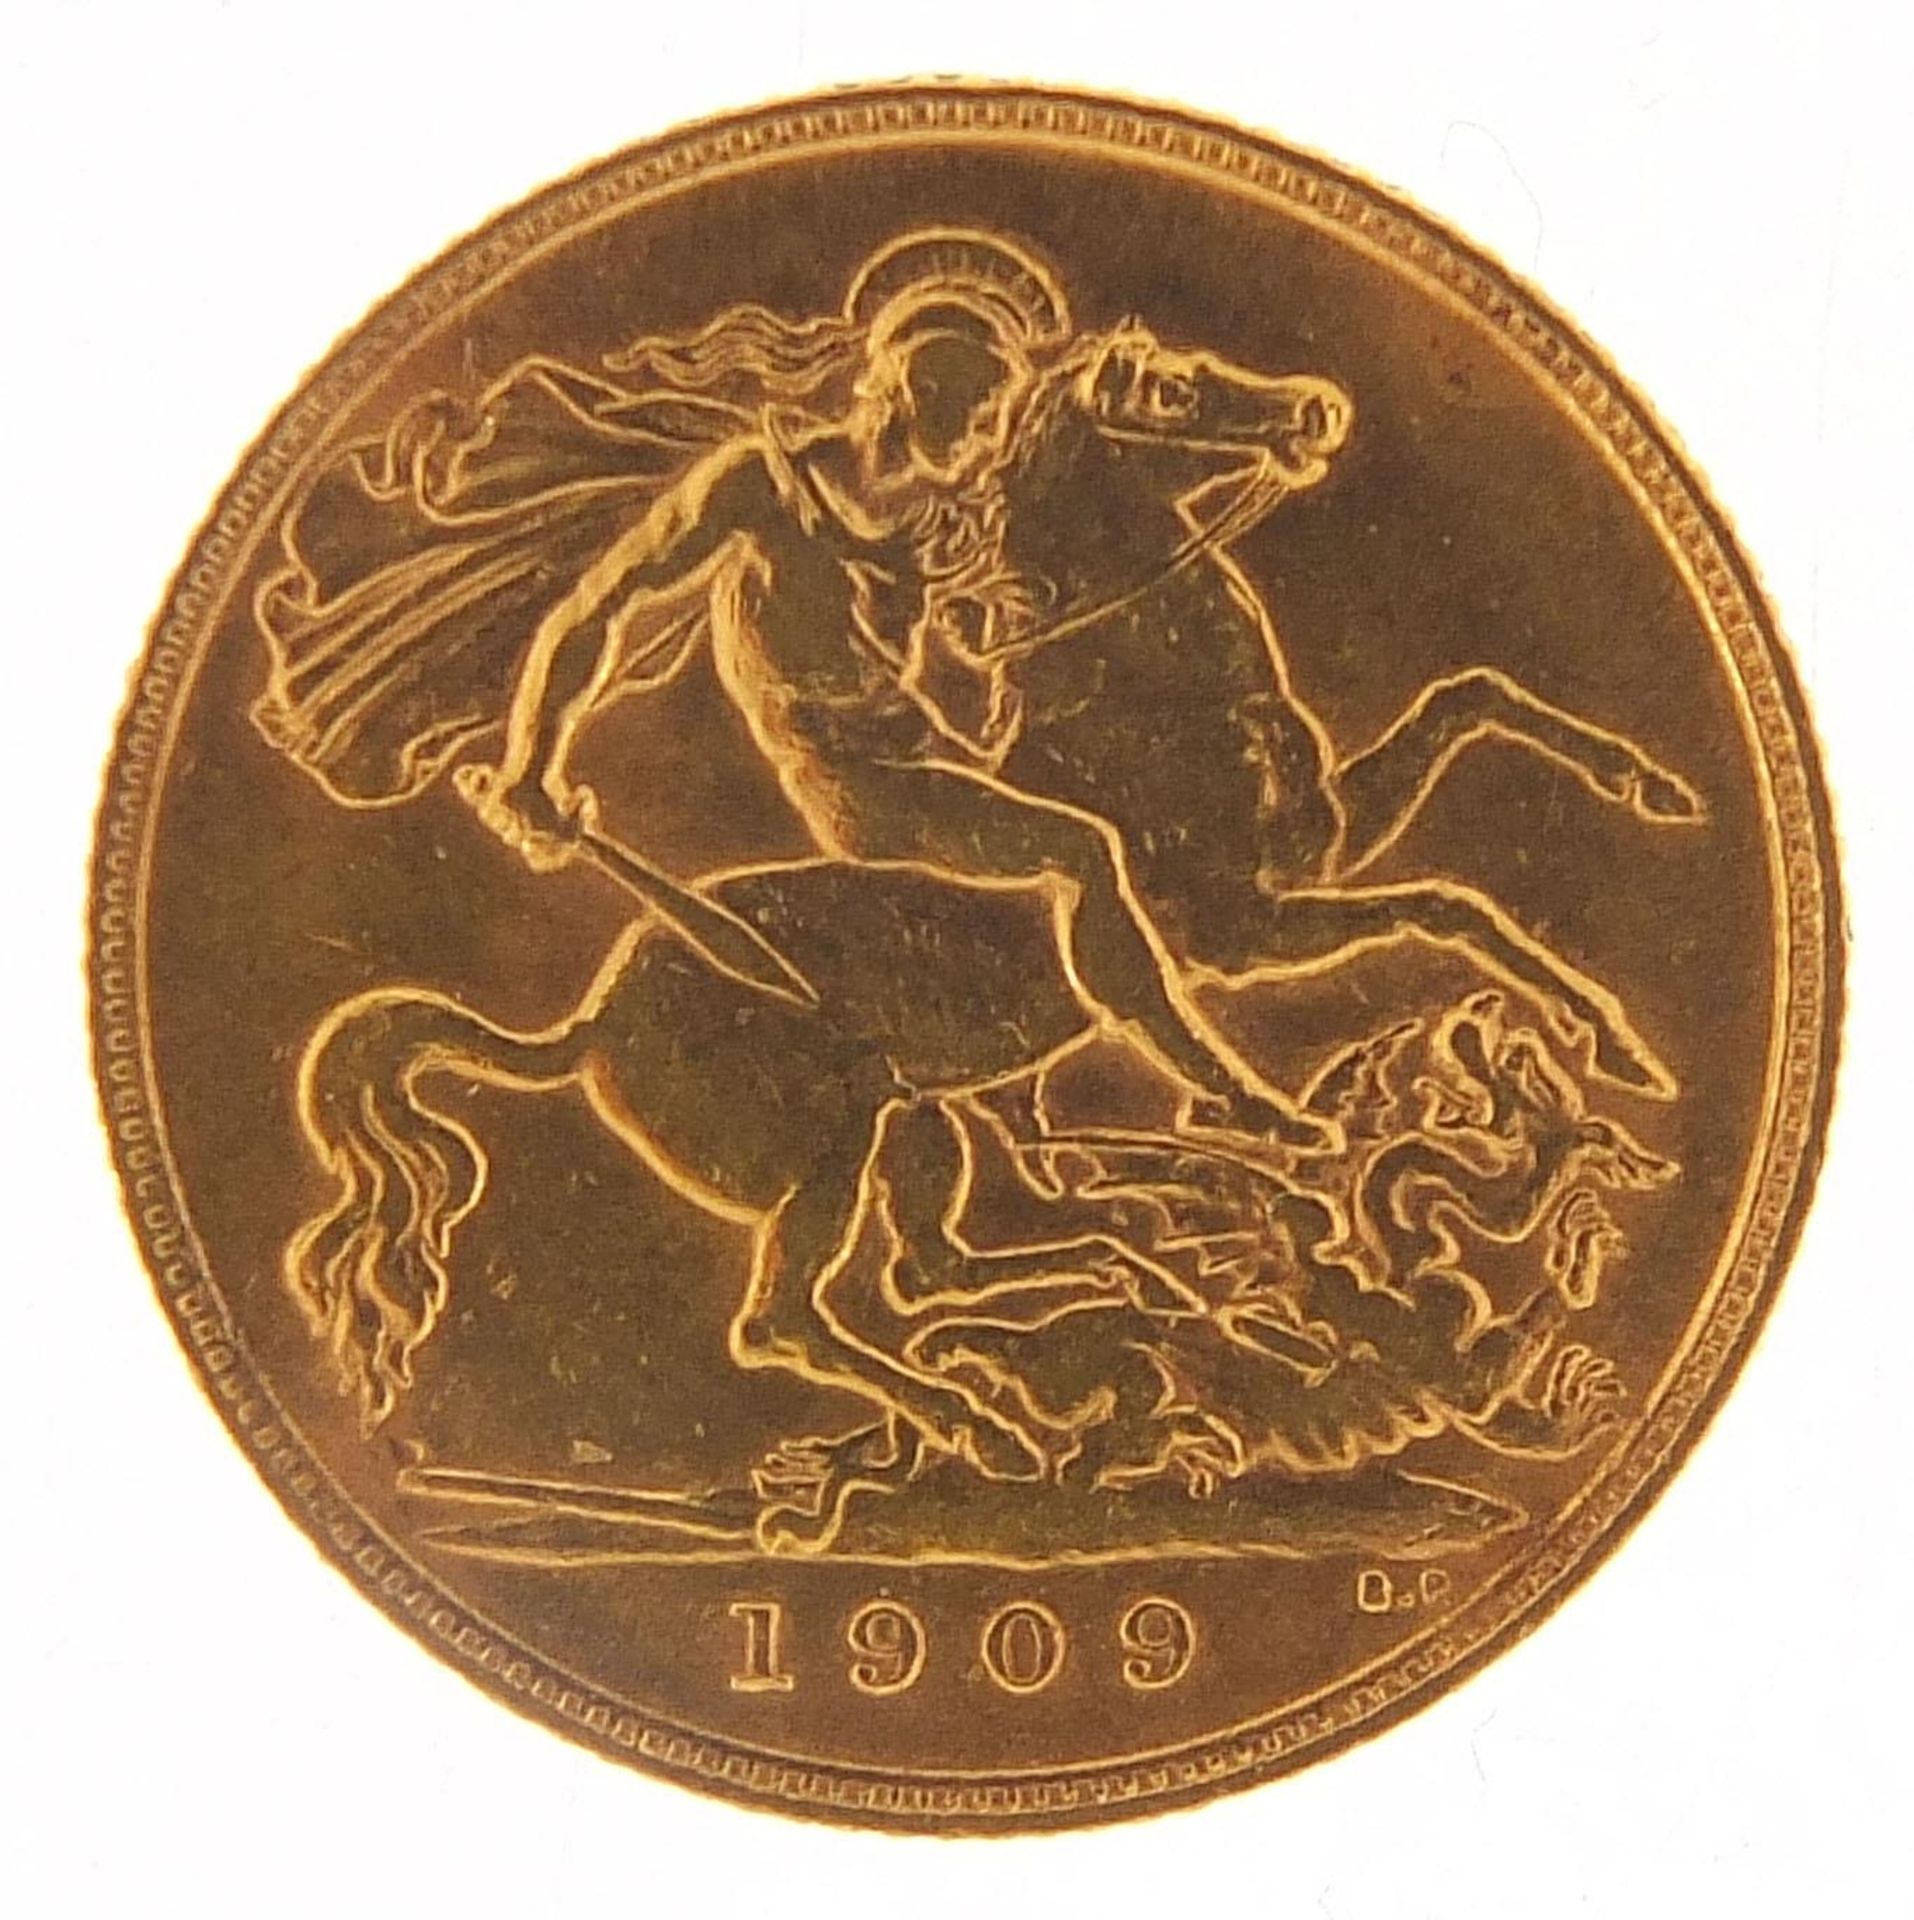 Edward VII 1909 gold half sovereign - this lot is sold without buyer's premium